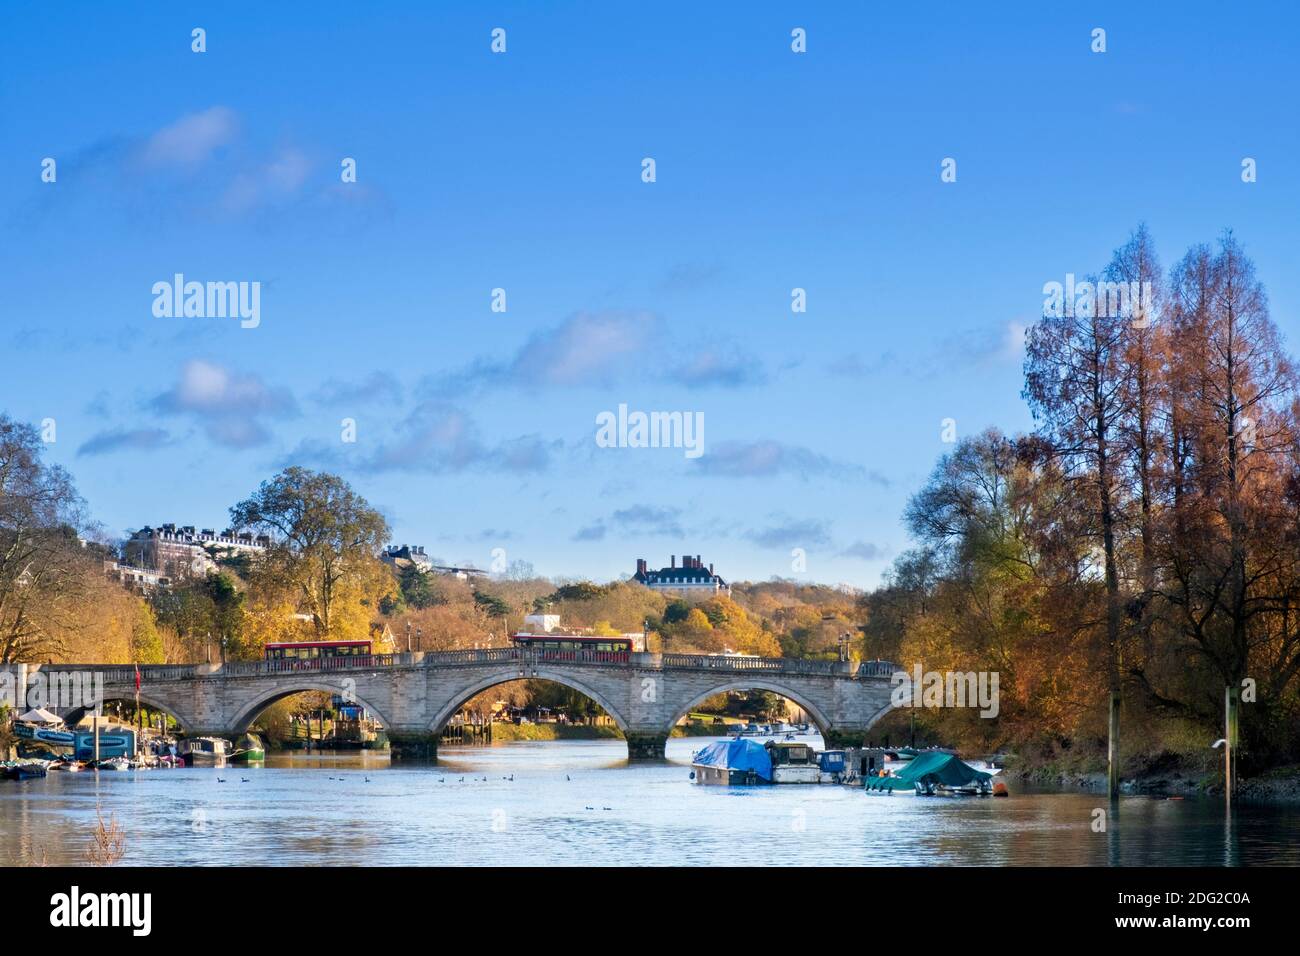 London, Richmond, 18th Century stone arch Richmond Bridge, affluent residential suburb in west London, Thames River, Autumn, boats, trees in fall Stock Photo